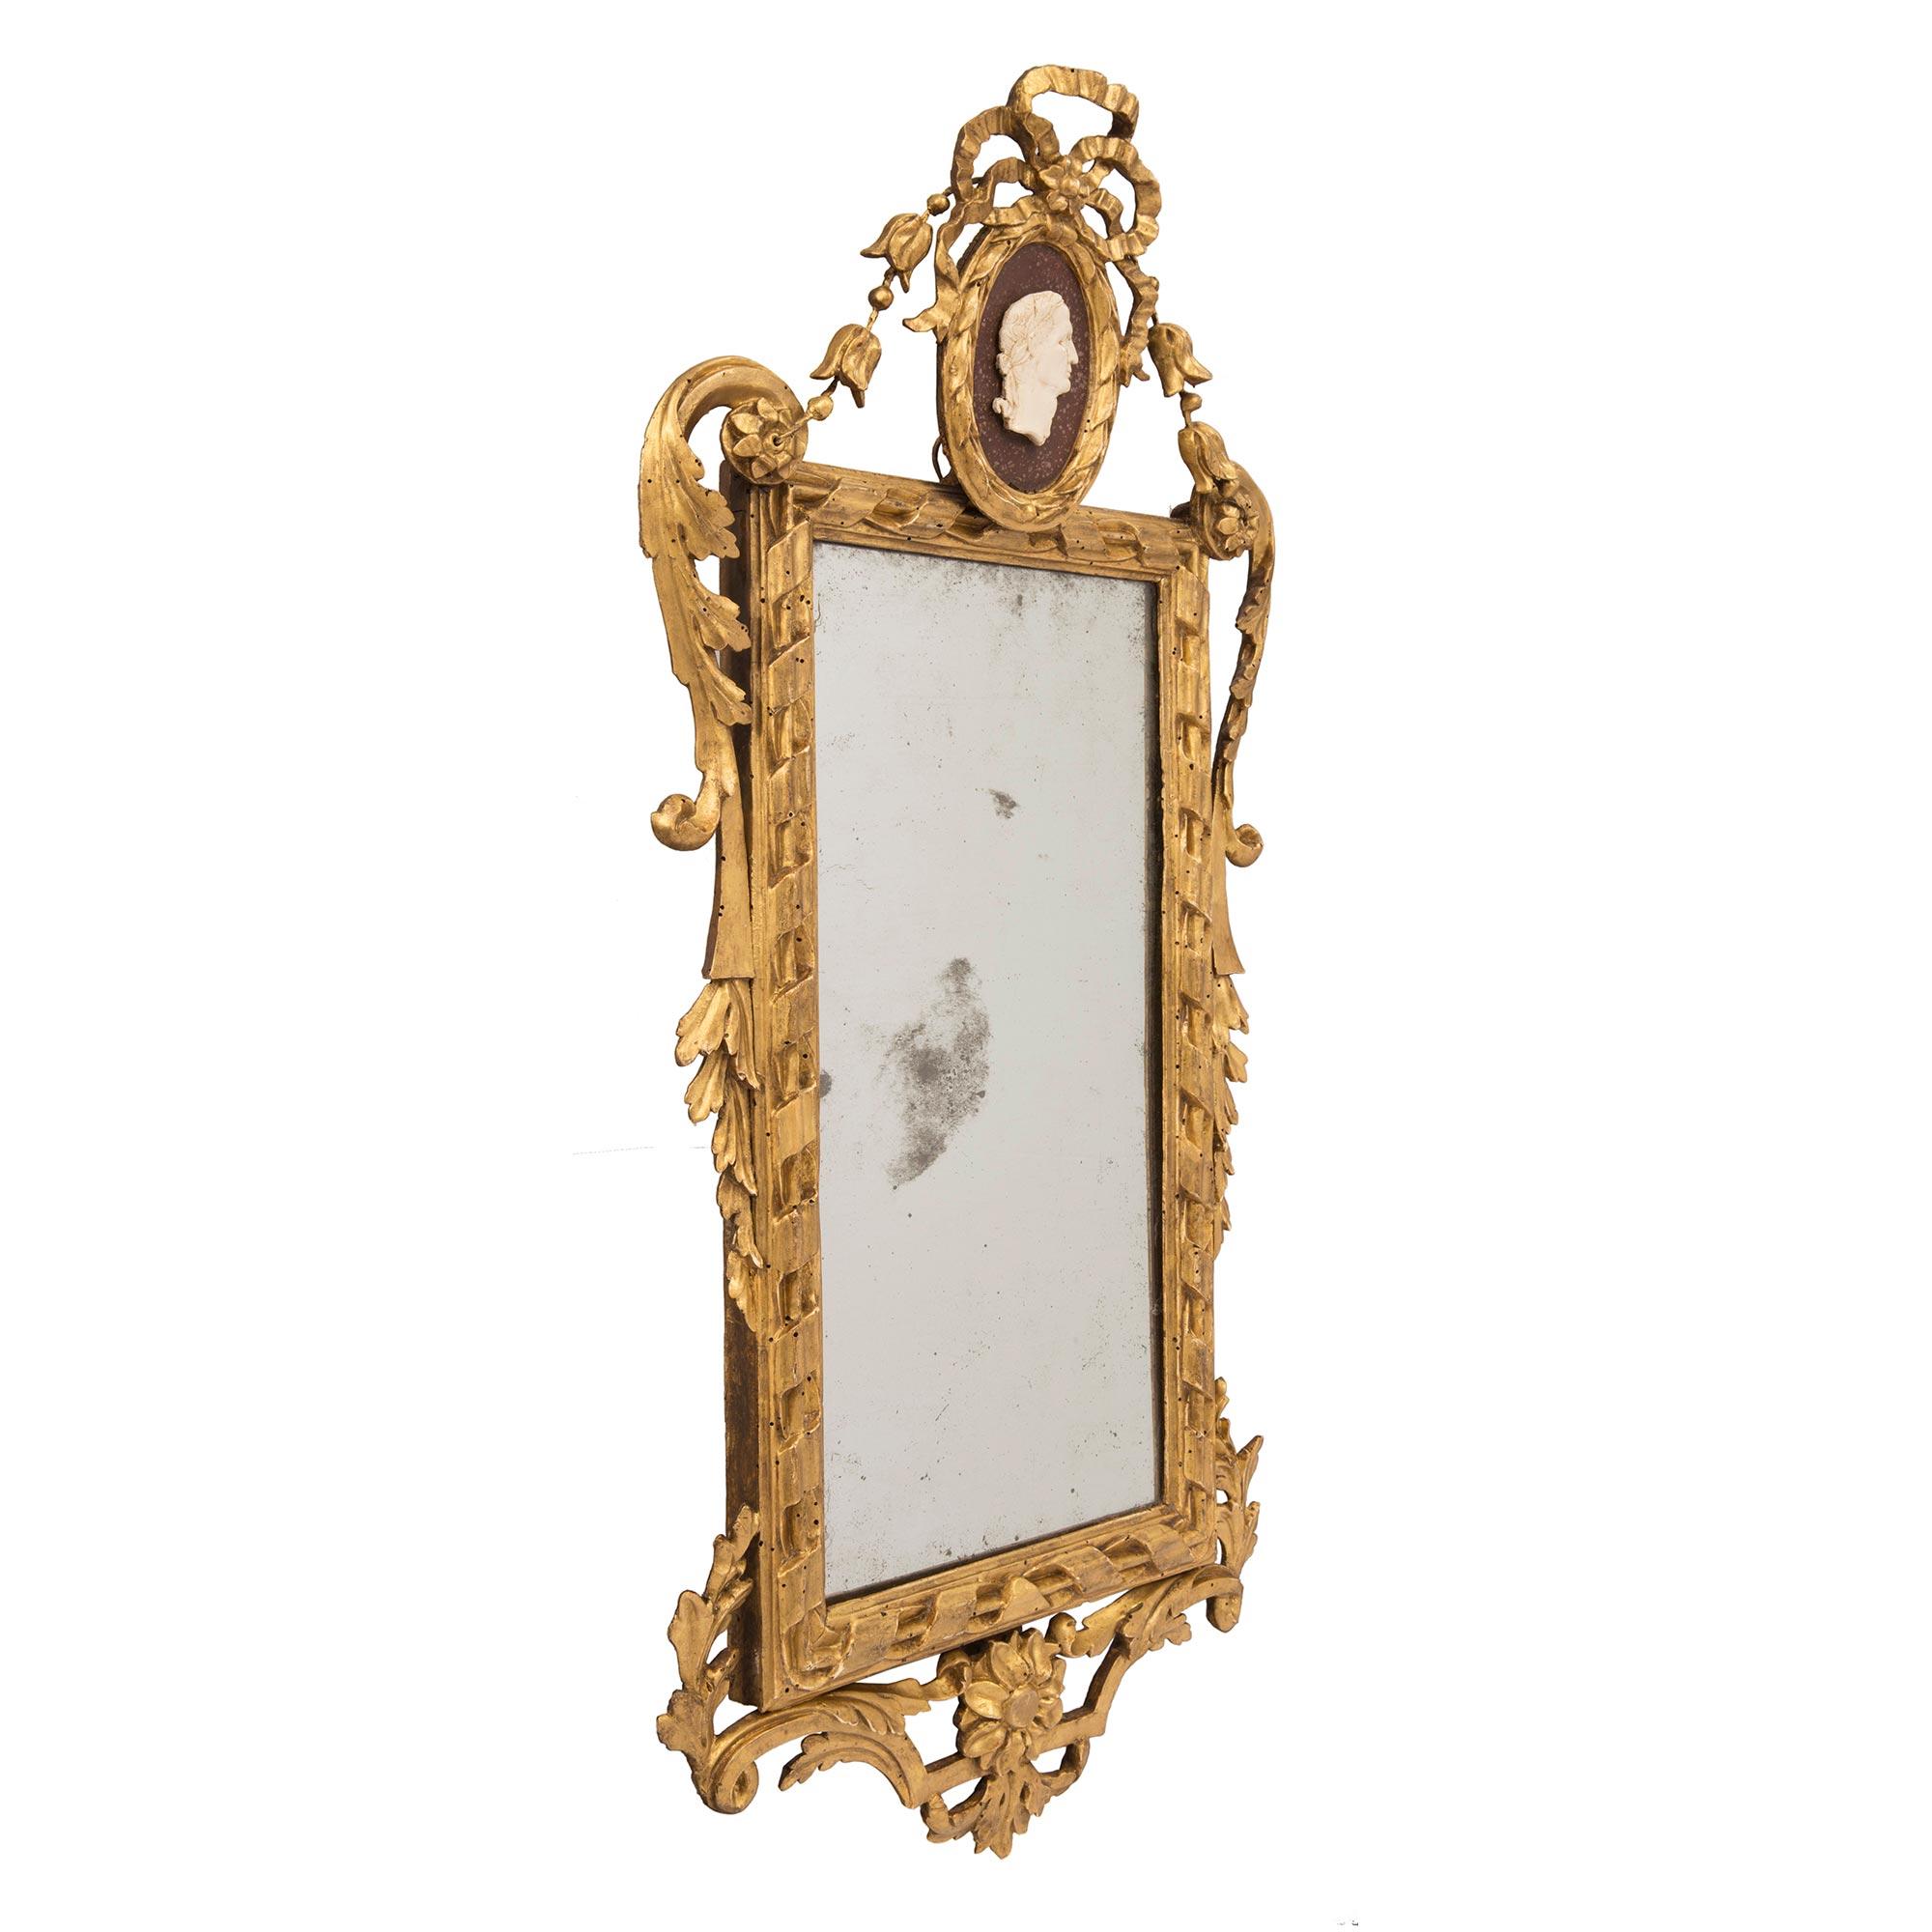 An exceptional true pair of Italian 18th century Louis XVI period giltwood mirrors with faux painted both Porphyry and white Carrara marble. Each elegant mirror retains their original mirror plates framed within a most decorative twisted rope